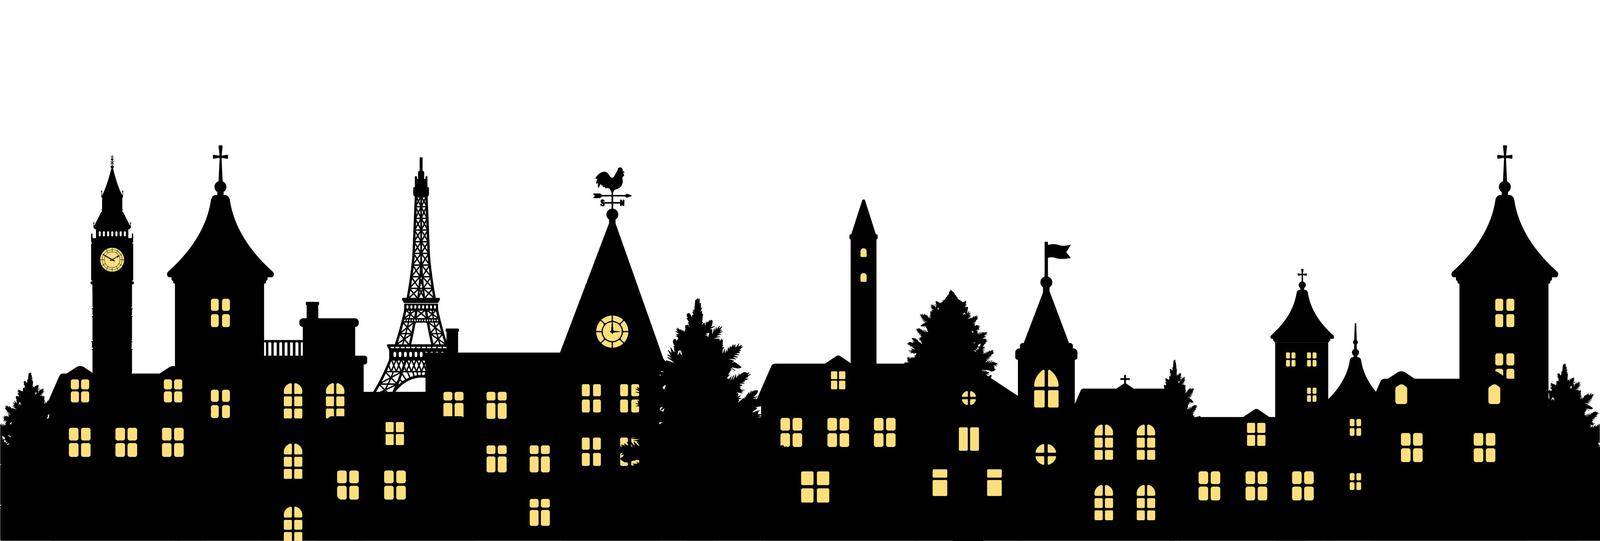 Silhouette landscape, townscape vector illustration by barks